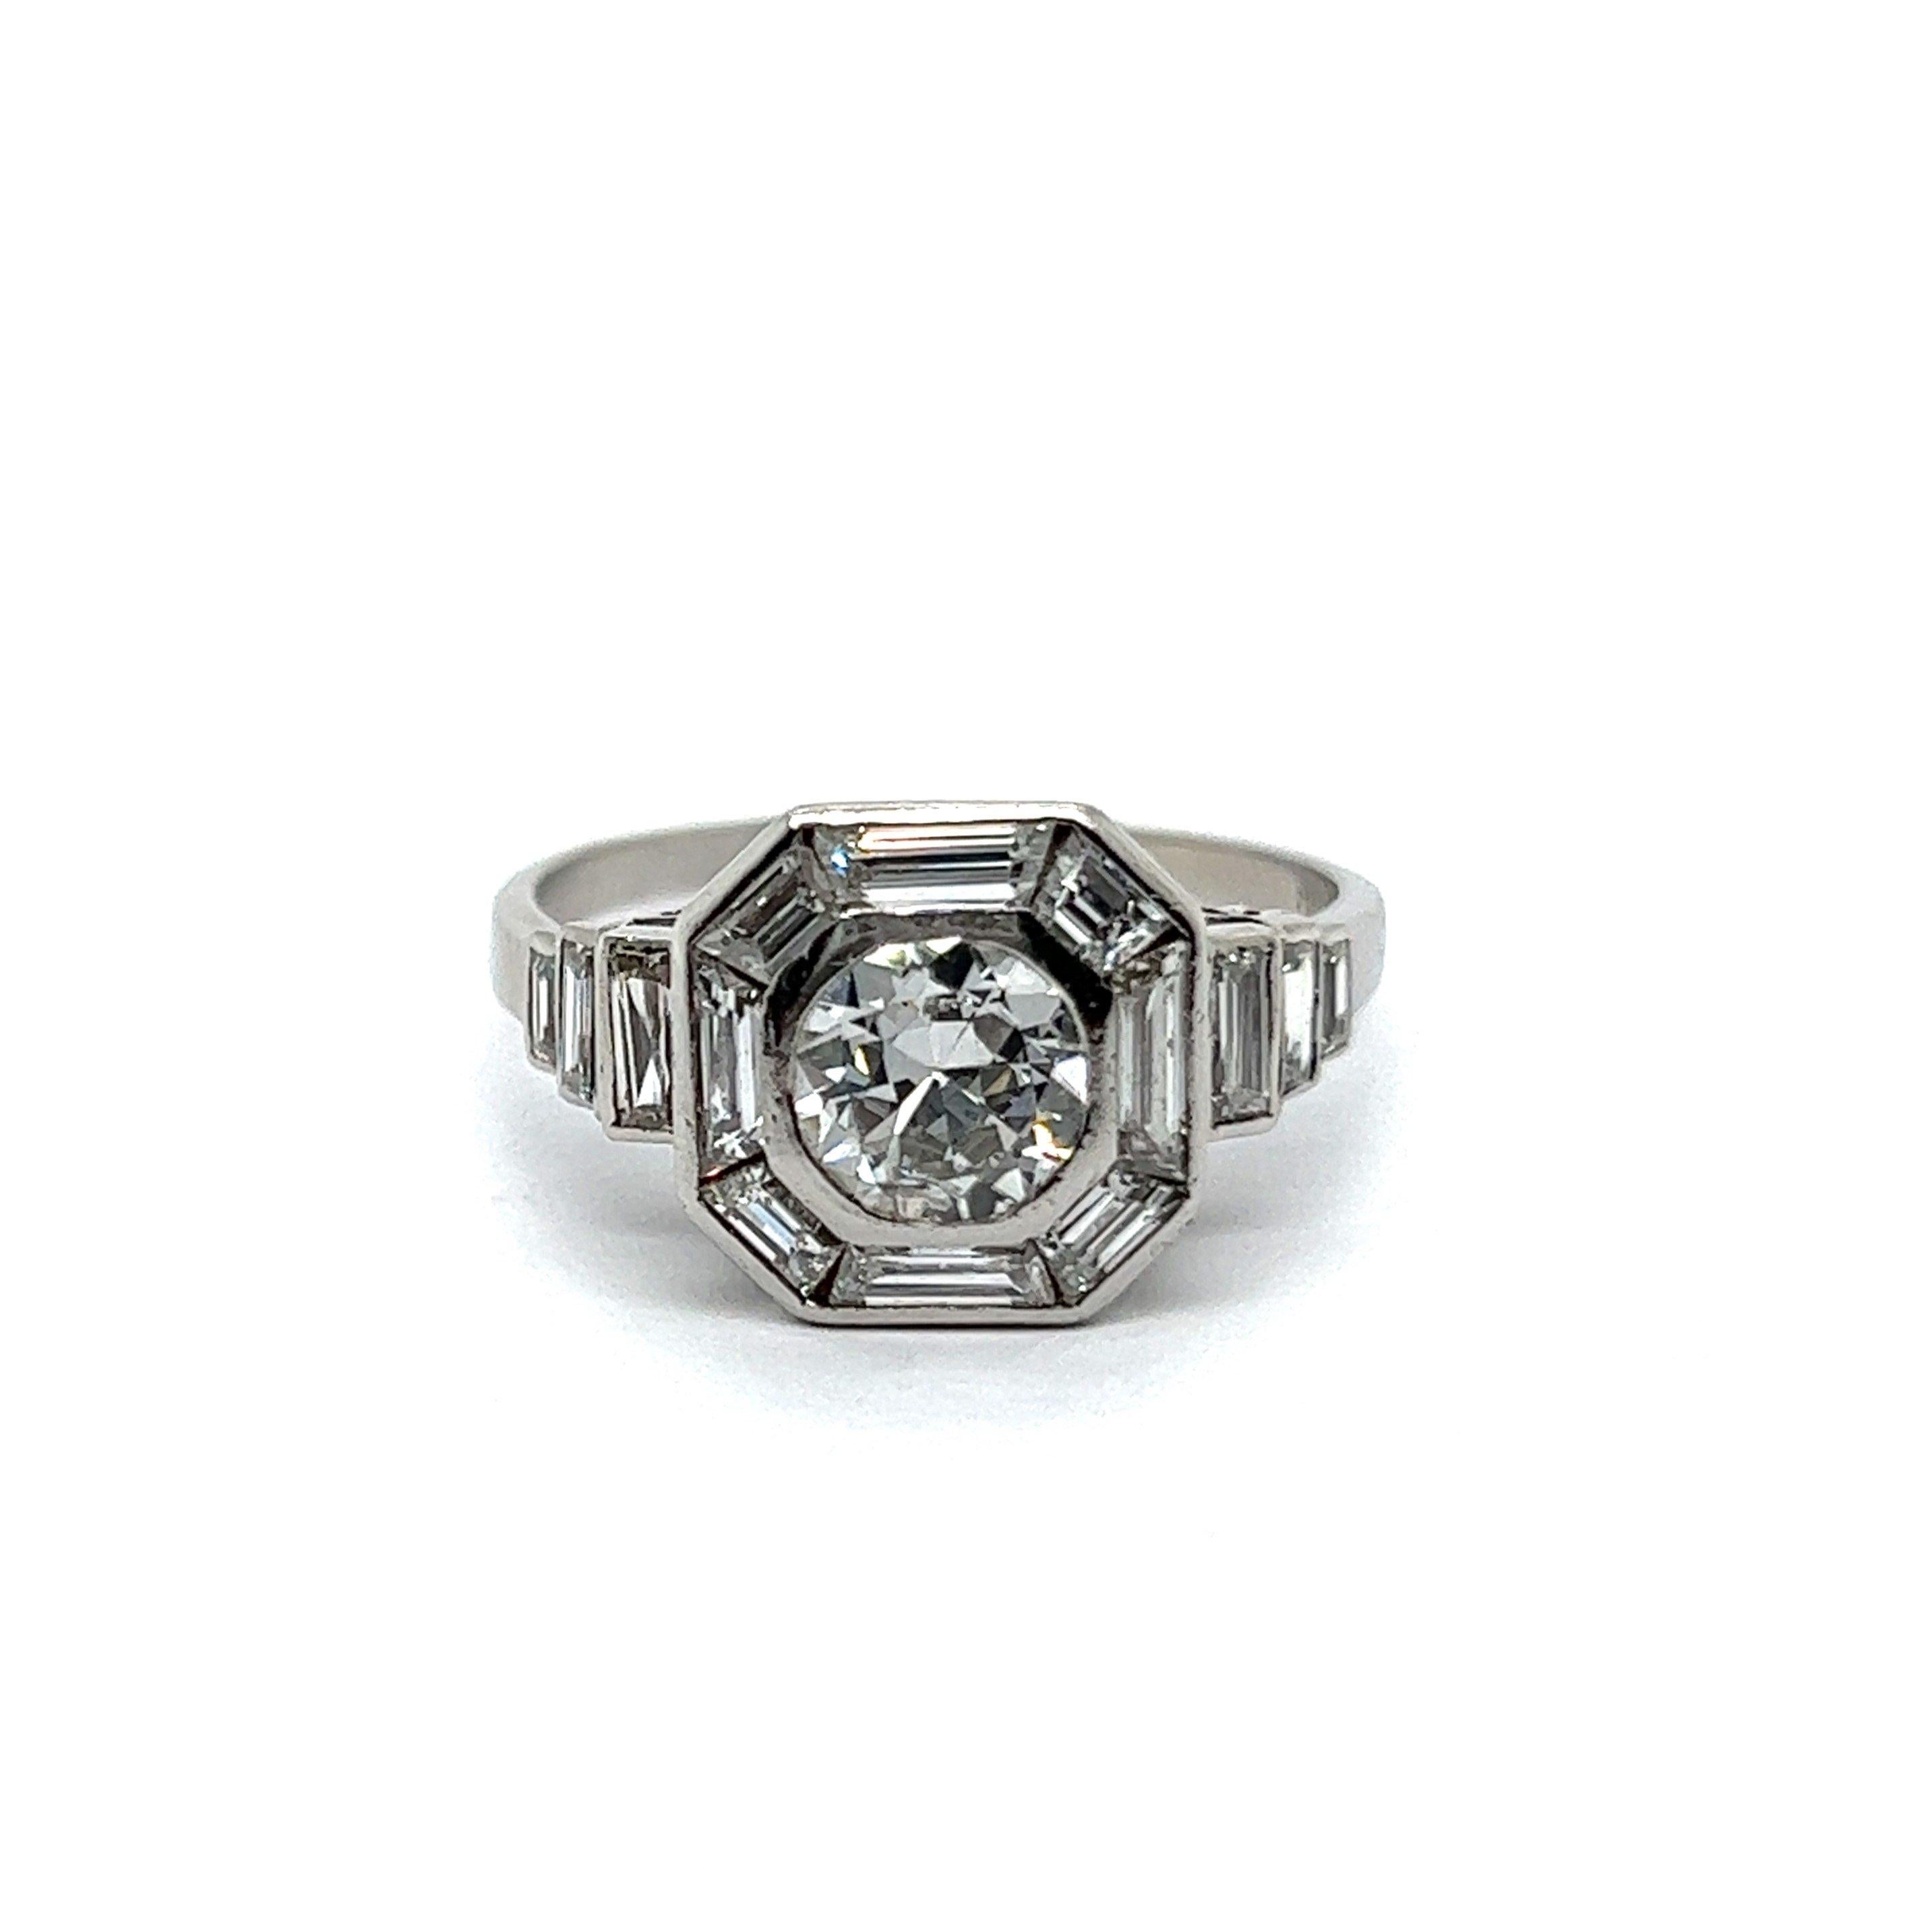 Introducing a captivating Art Deco-inspired ring with diamonds.  At the heart of this glamorous piece lies a resplendent 0.75-carat brilliant-cut diamond, surrounded by an entourage of 14 dazzling diamonds. The central diamond, in a brilliant H-I